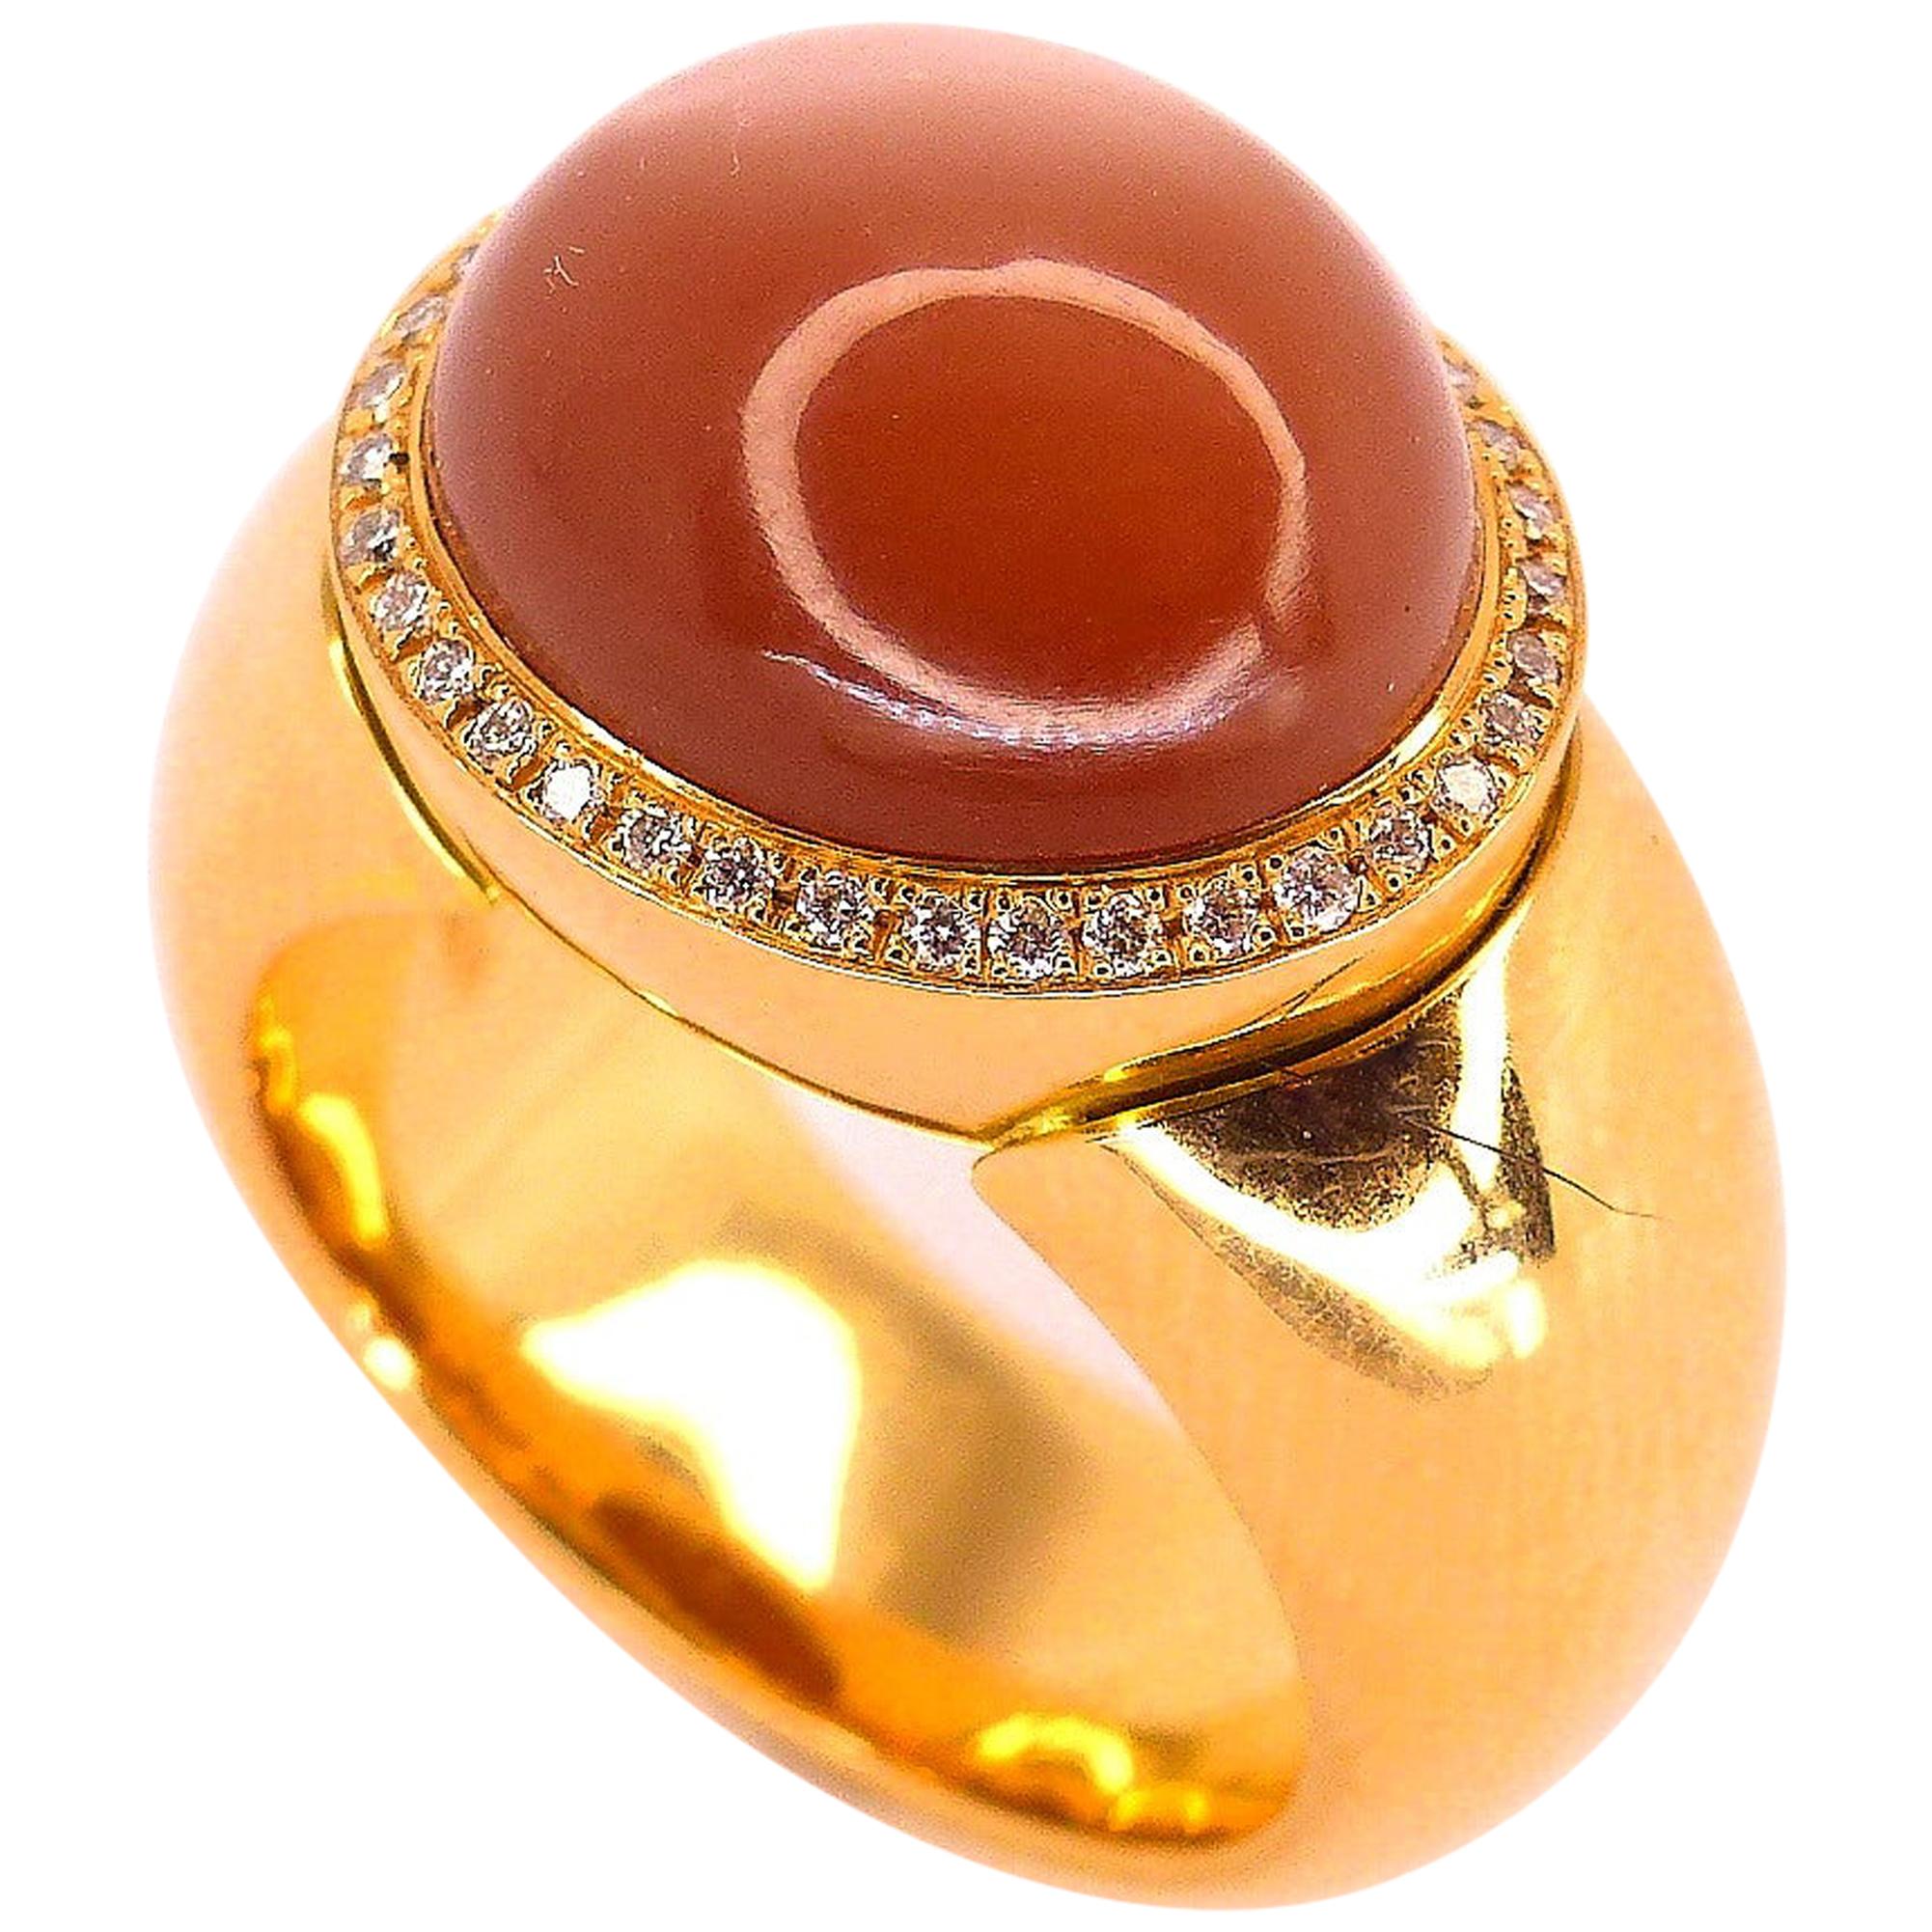  Ring in Rose Gold with 1 Brown Moonstone Oval 14x12mm and 42 Diamonds.